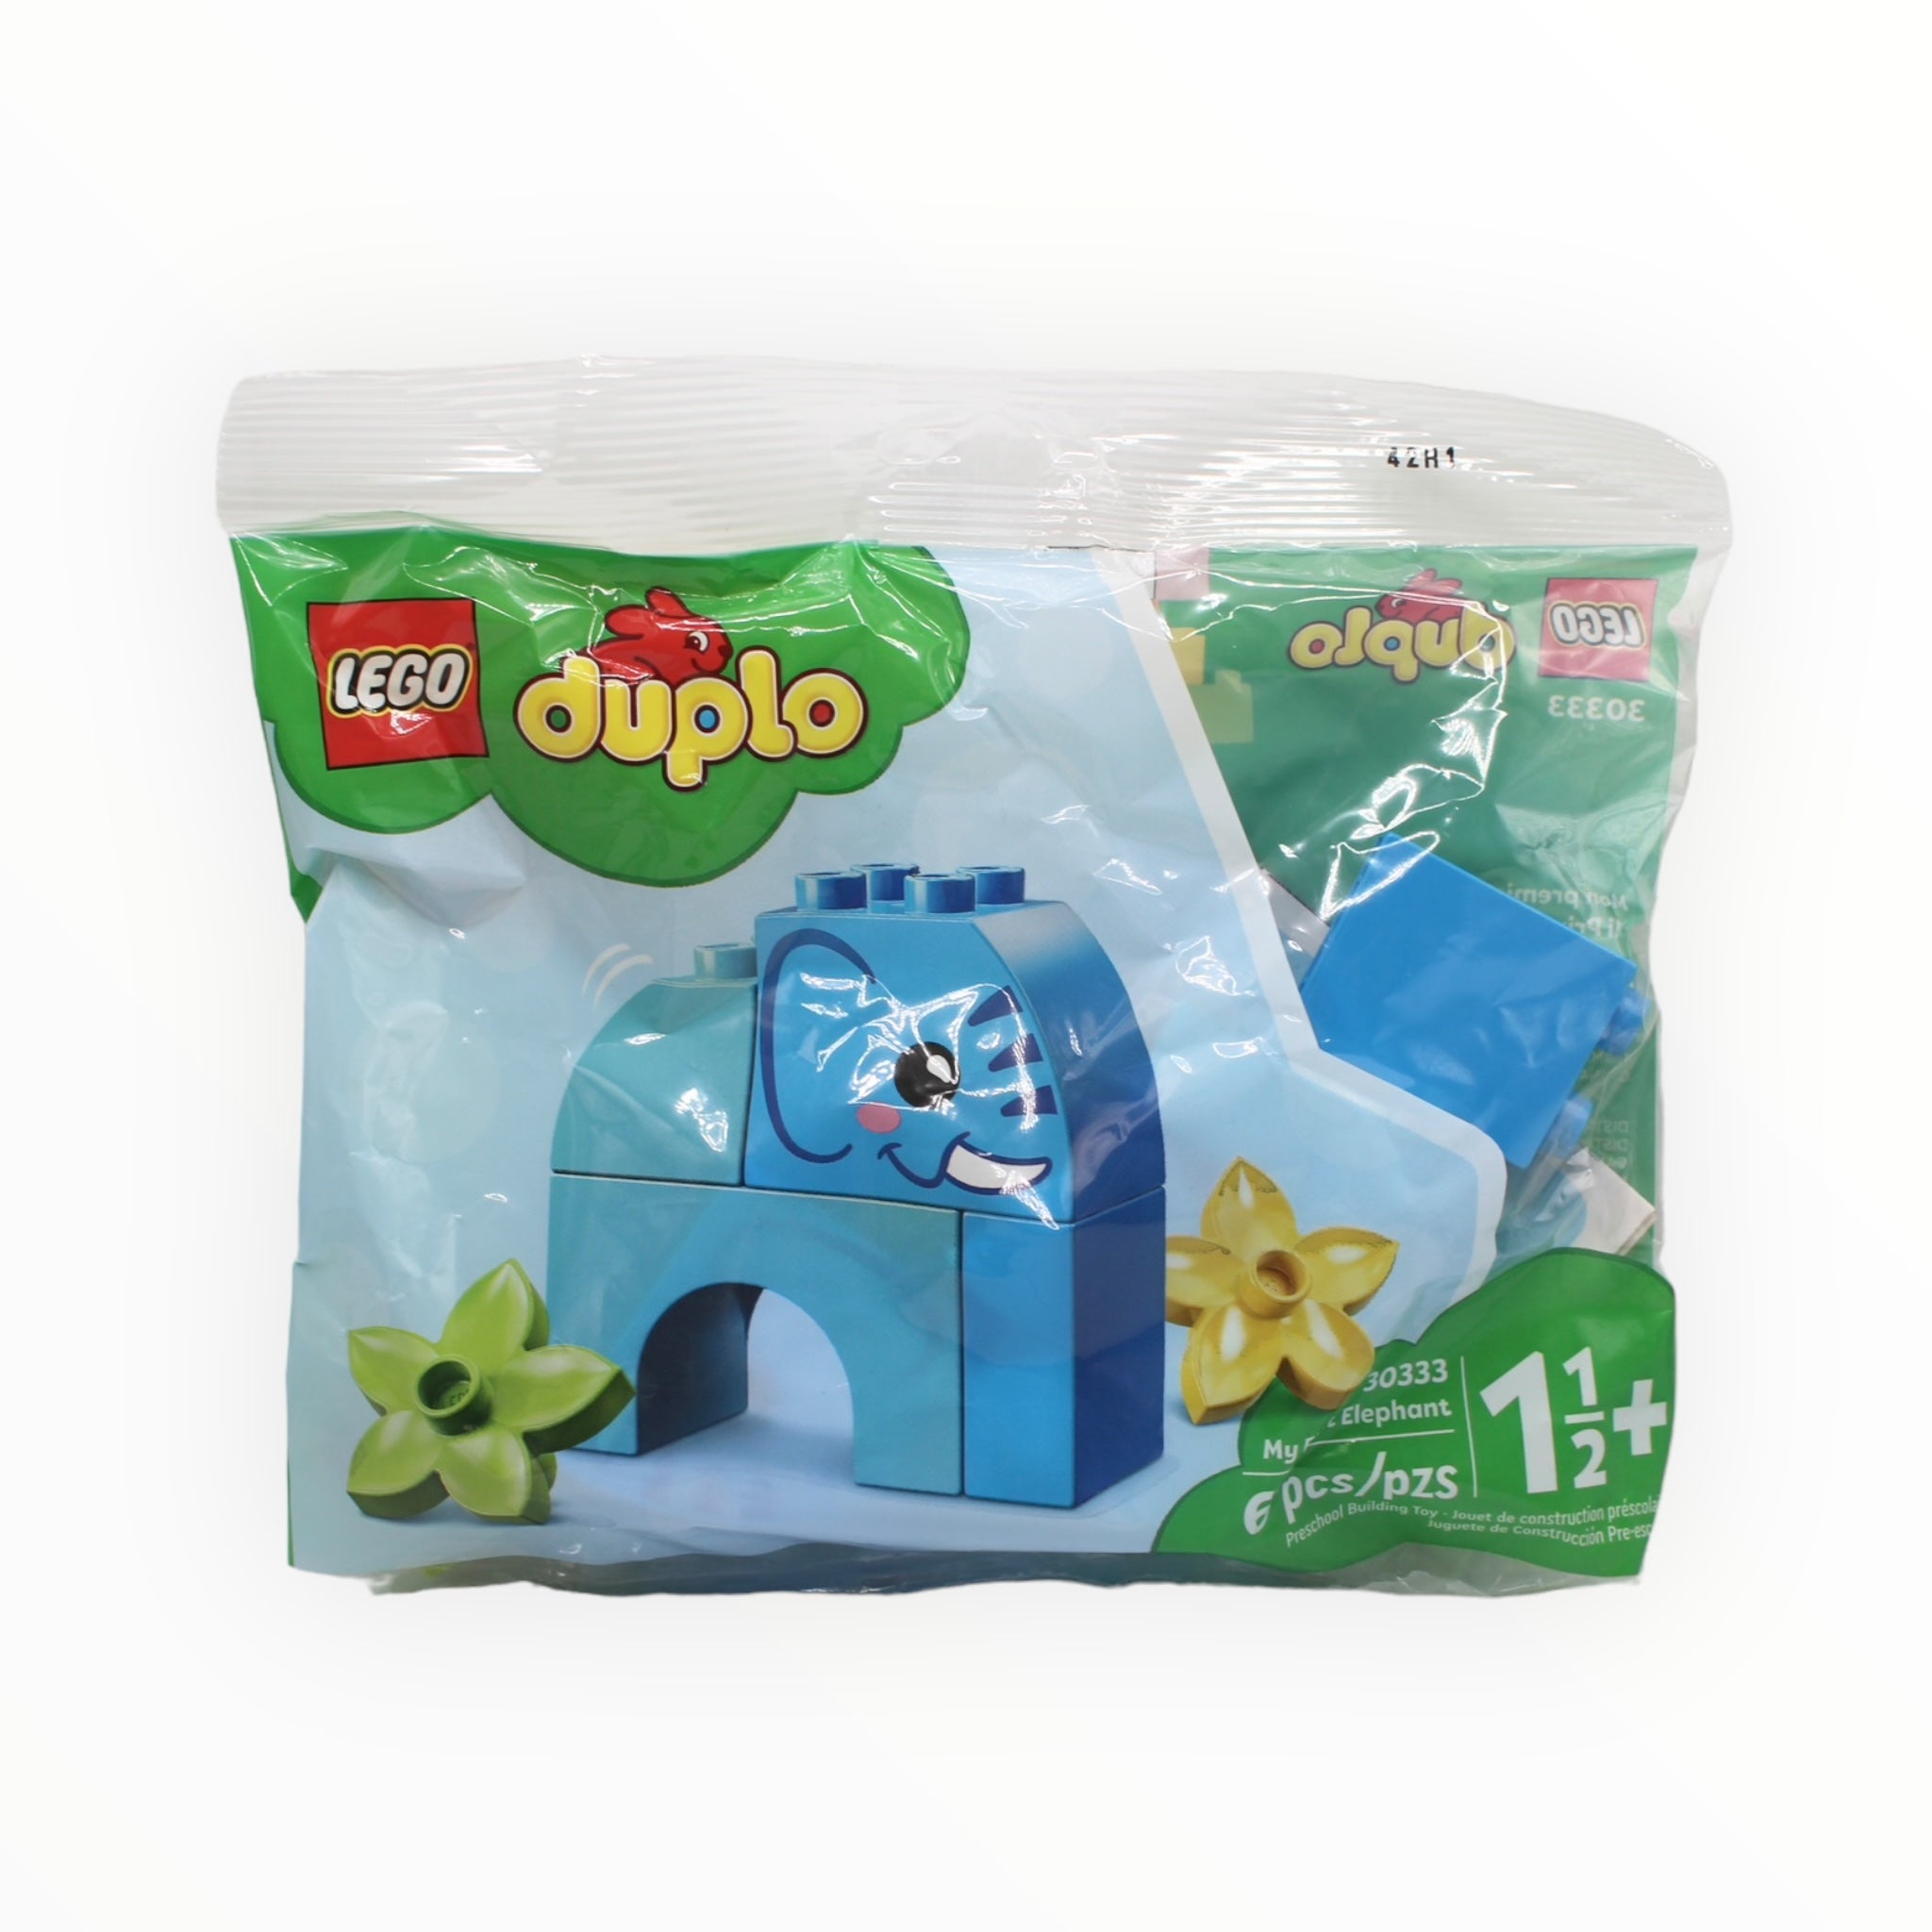 Polybag 30333 DUPLO My First Elephant